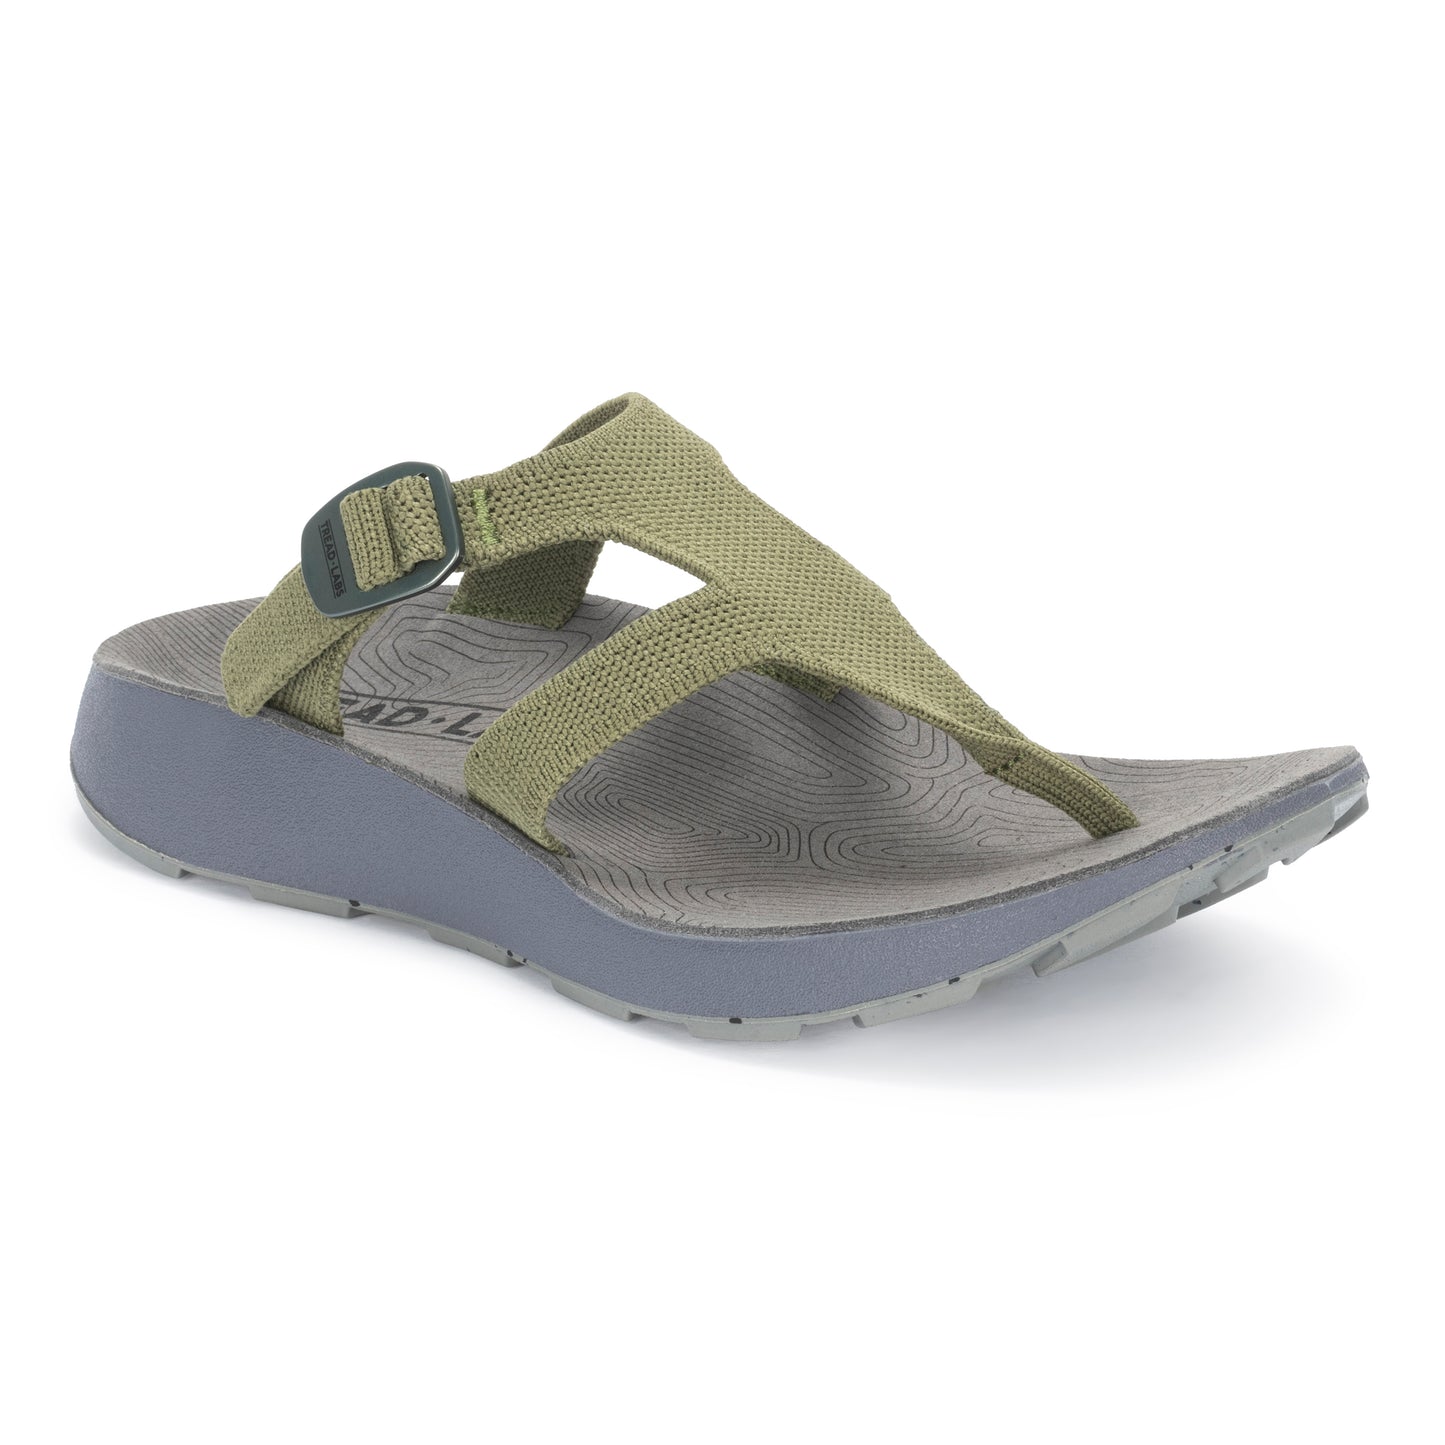 Discontinued Women's Covelo Sandal